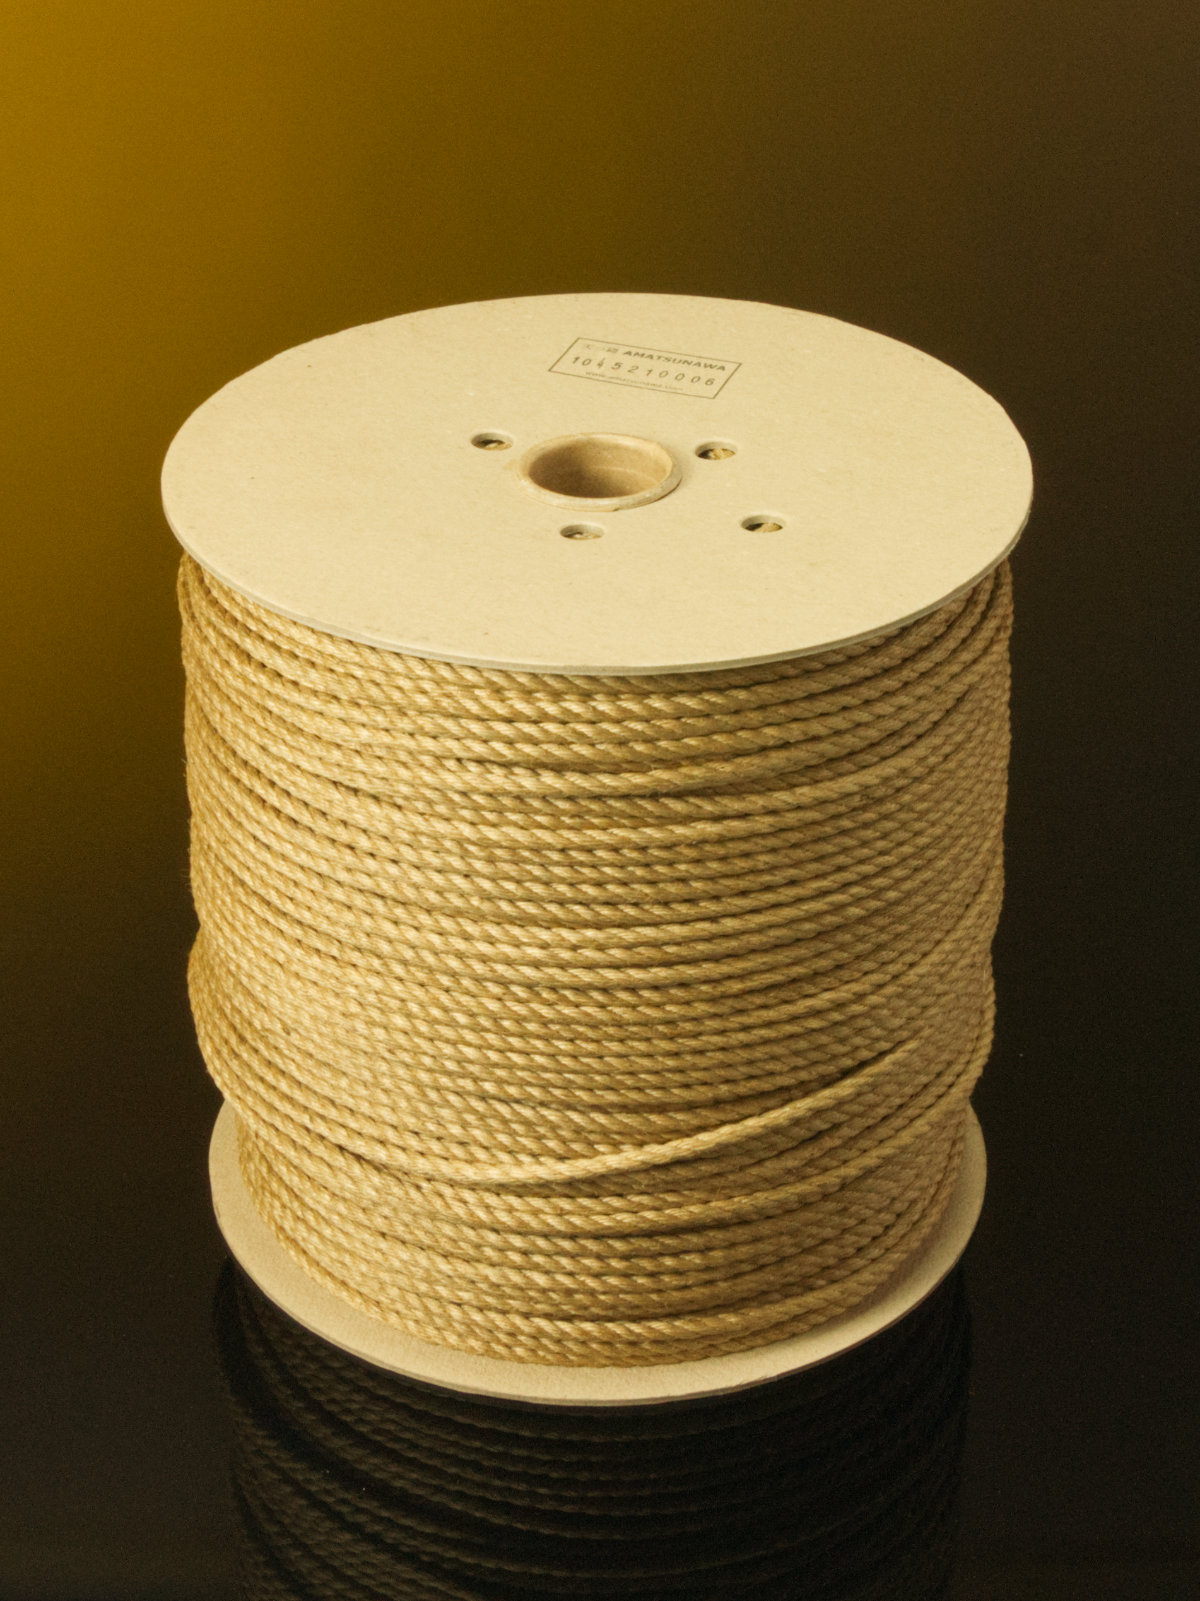 ∅ 4.5mm Jouyoku MAXI-ROLL, ~6kg, 400m, ready-for-use Japanese-made jute rope, various diameters, JBO-free 